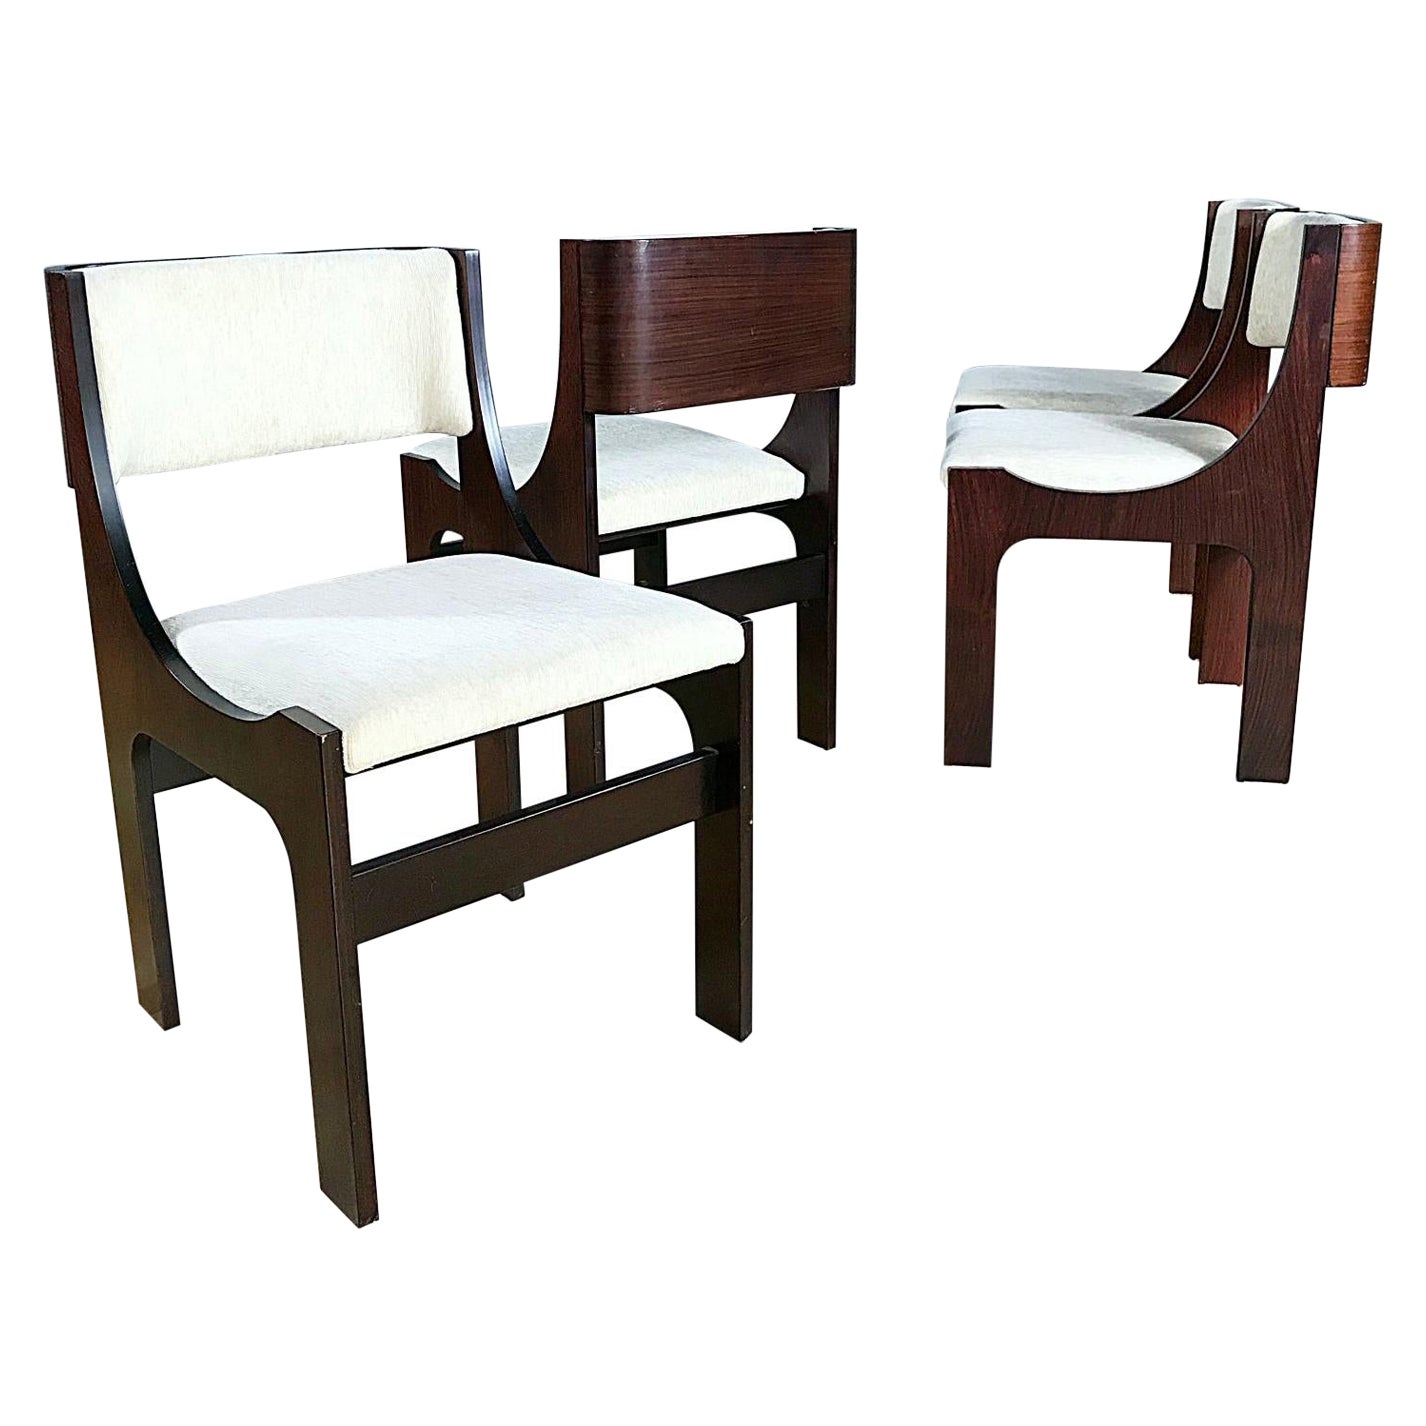 Four Italian Postmodern Sculptural Walnut Dining Chairs, 1980s, Italy For Sale